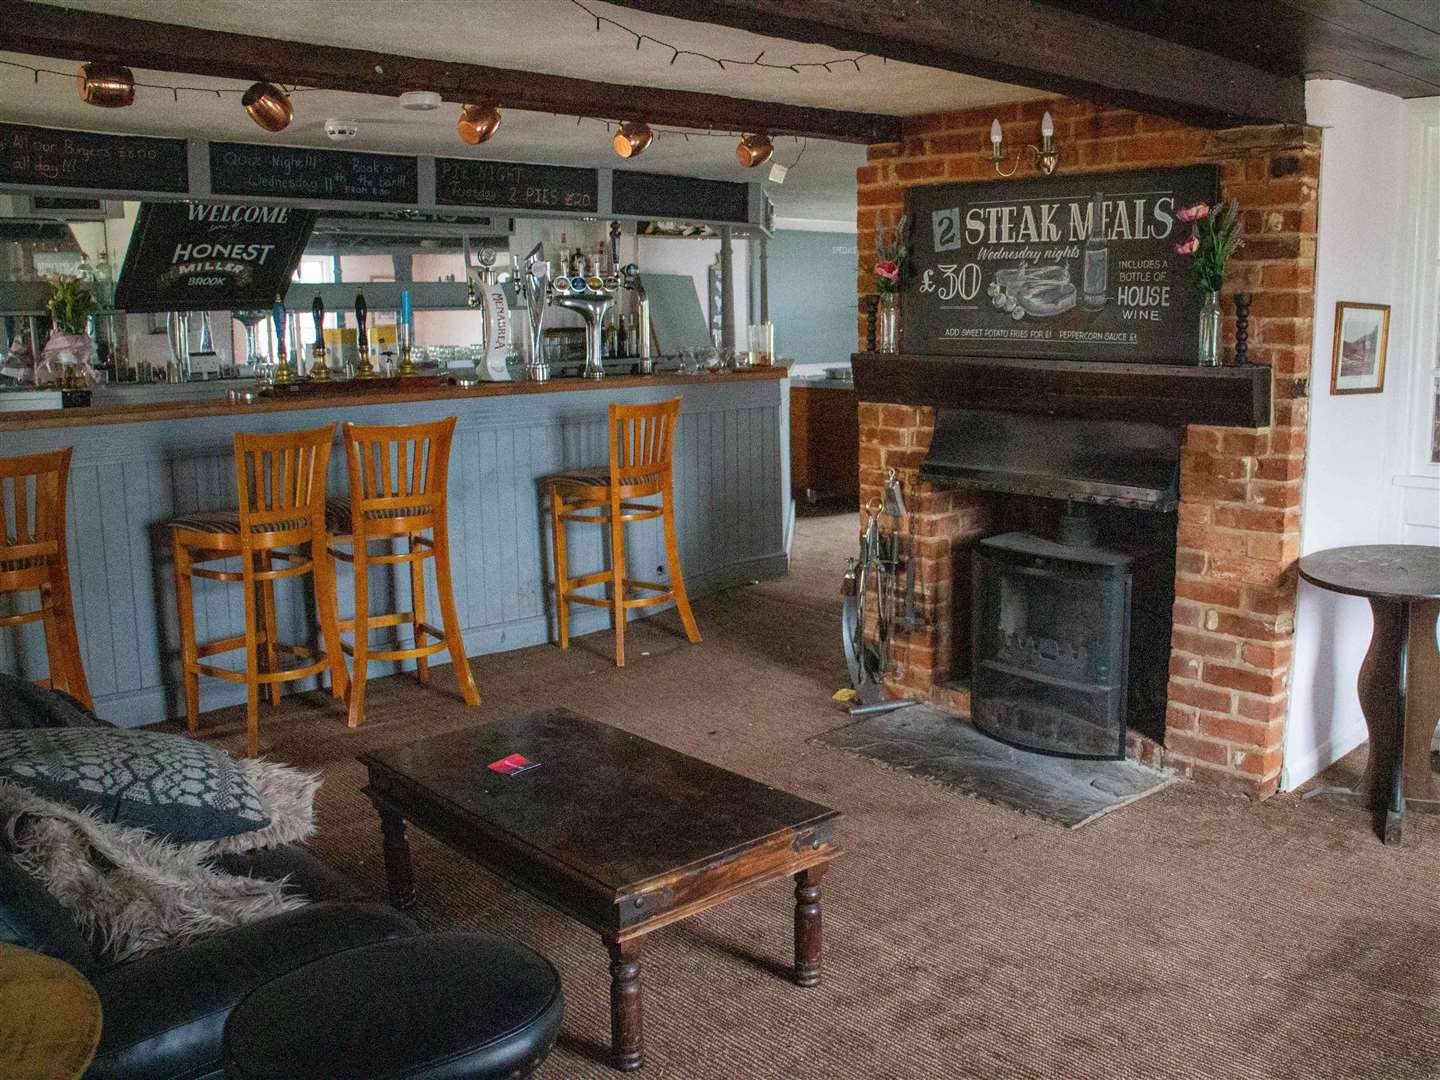 The Honest Miller has wide rooms and a period fireplace